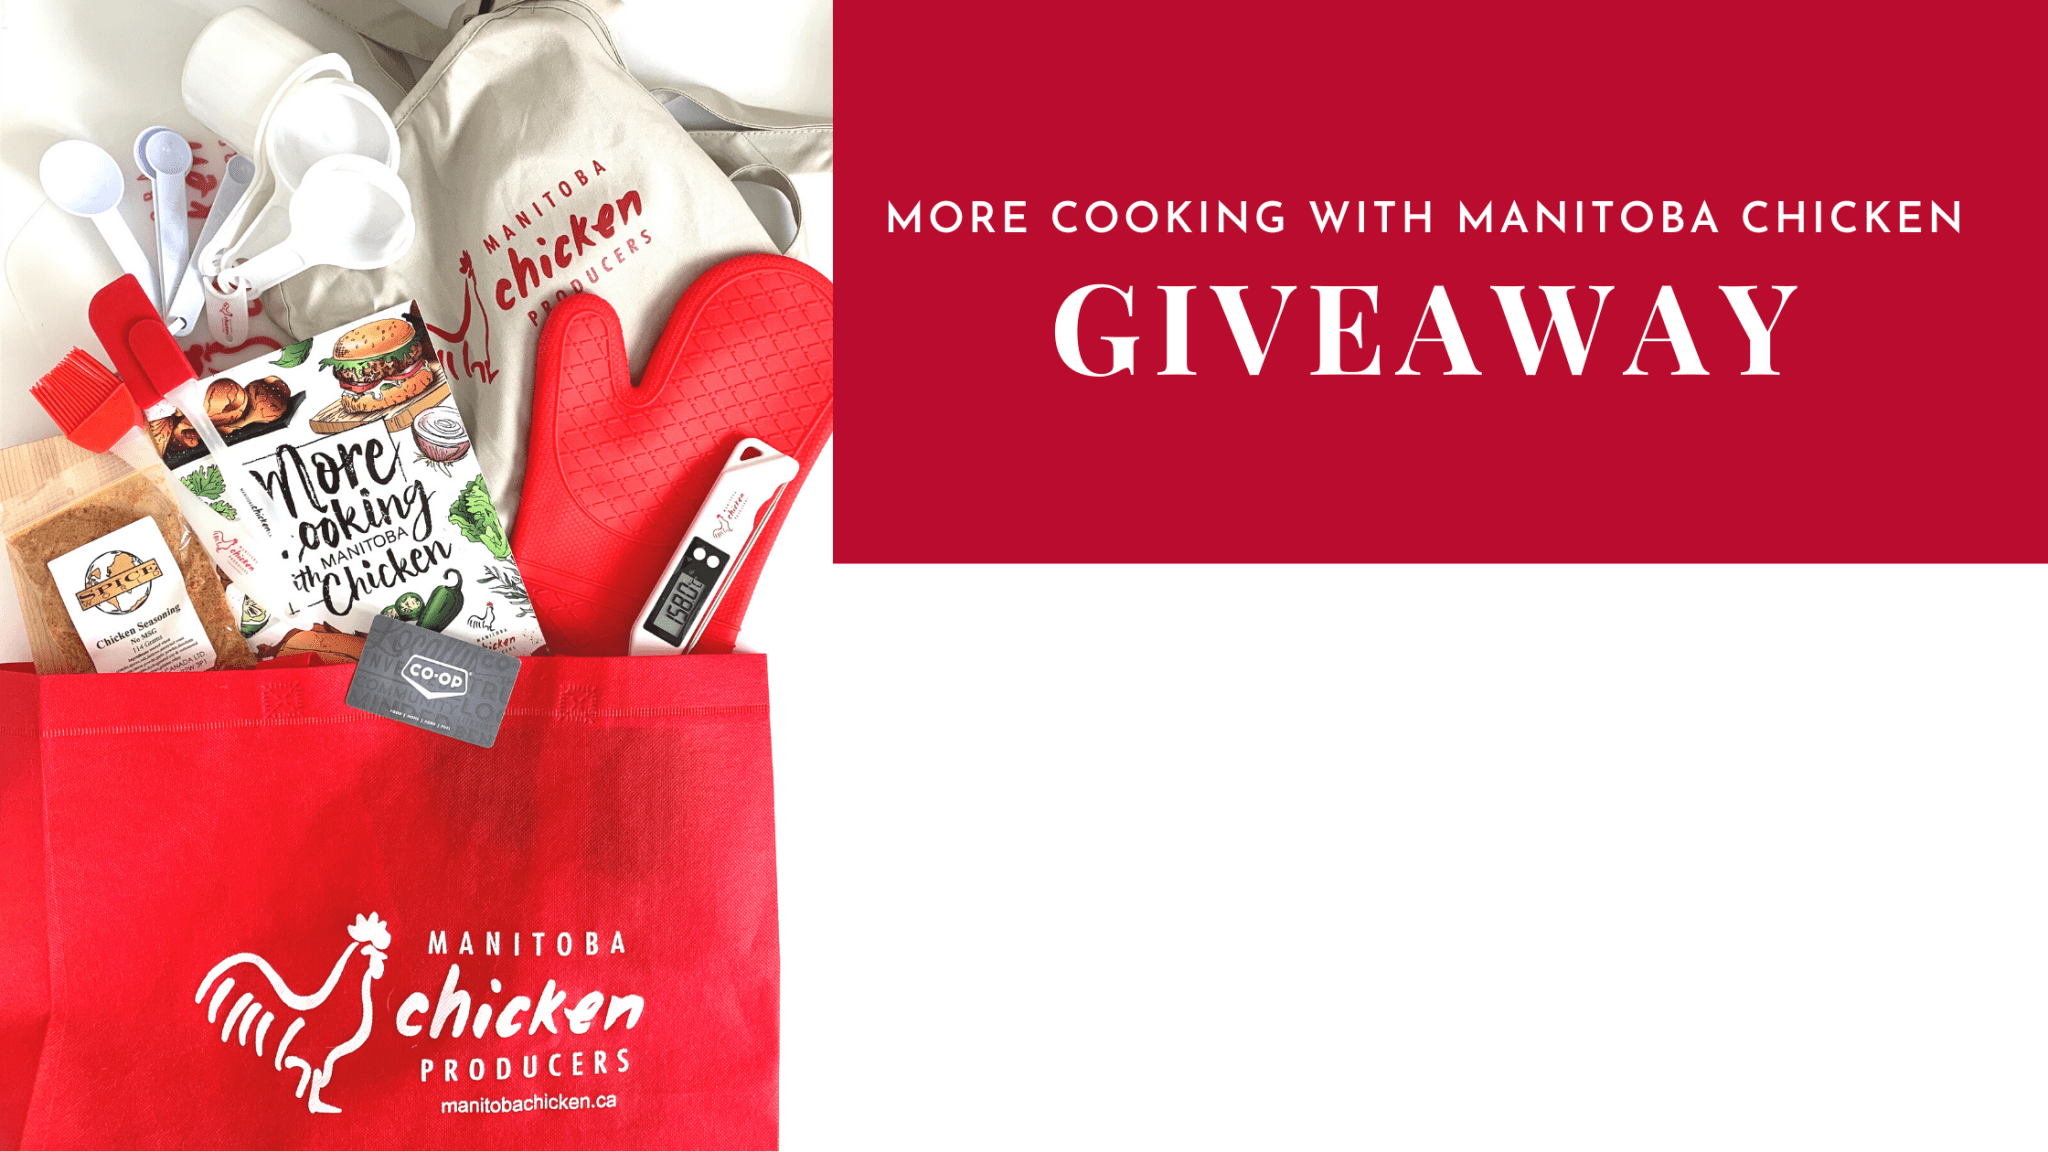 More Cooking with Manitoba Chicken Giveaway 2022